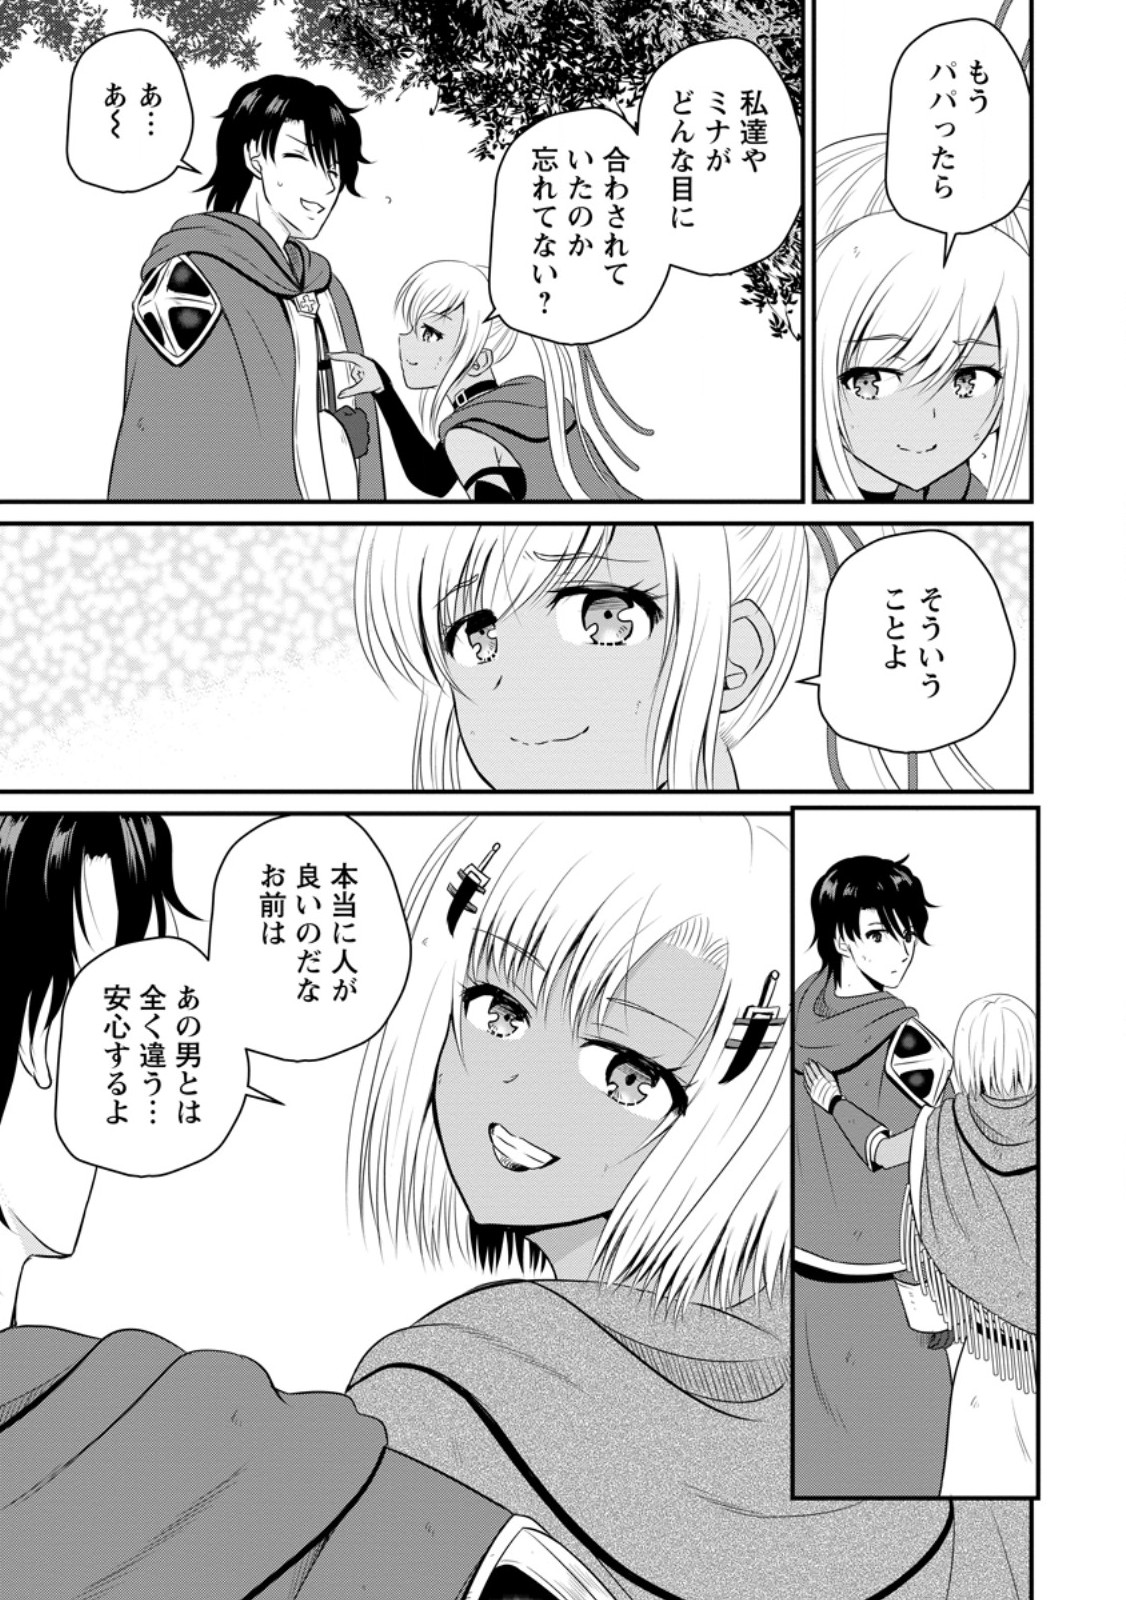 The Frontier Life of The Low-Class Ossan Healer And The Lovery Girl - Chapter 48.3 - Page 9